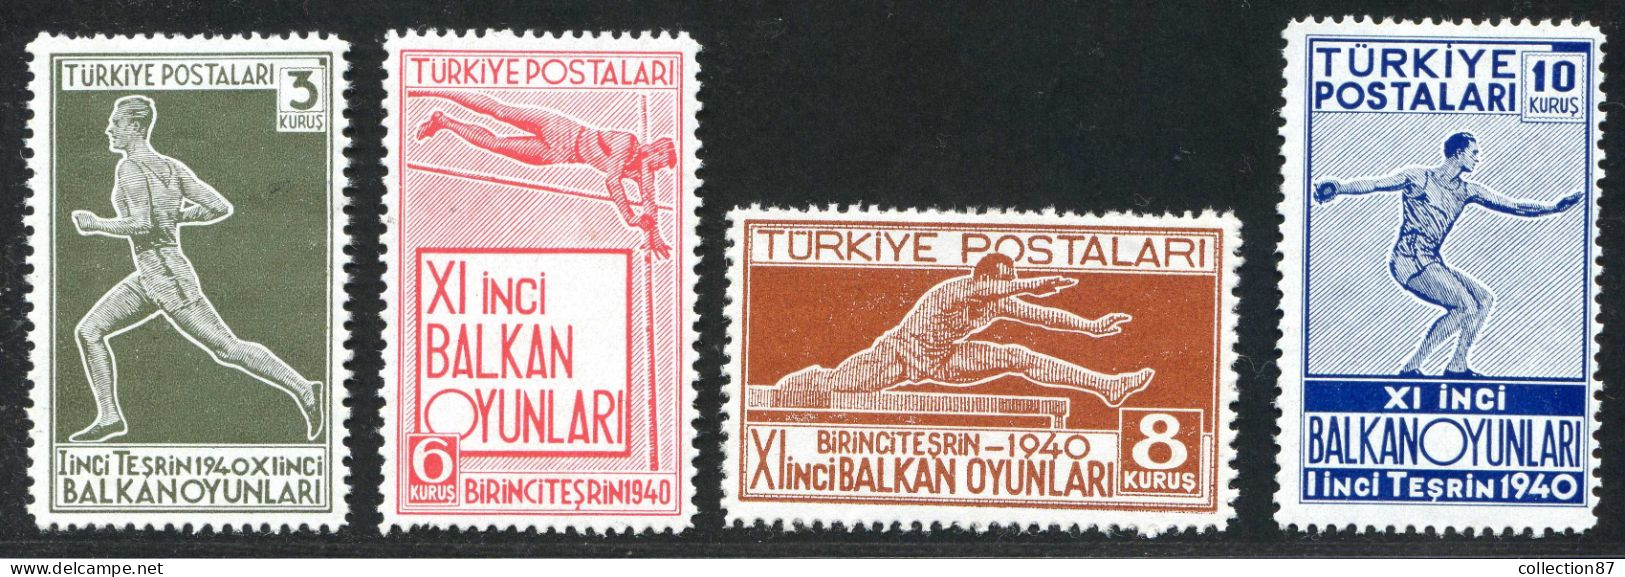 REF 091 > TURQUIE < Yv N° 943 à 946 * * < Neuf Luxe Dos Visible MNH * * Cat 33 € - Turkey Sport Athlétisme - Unused Stamps